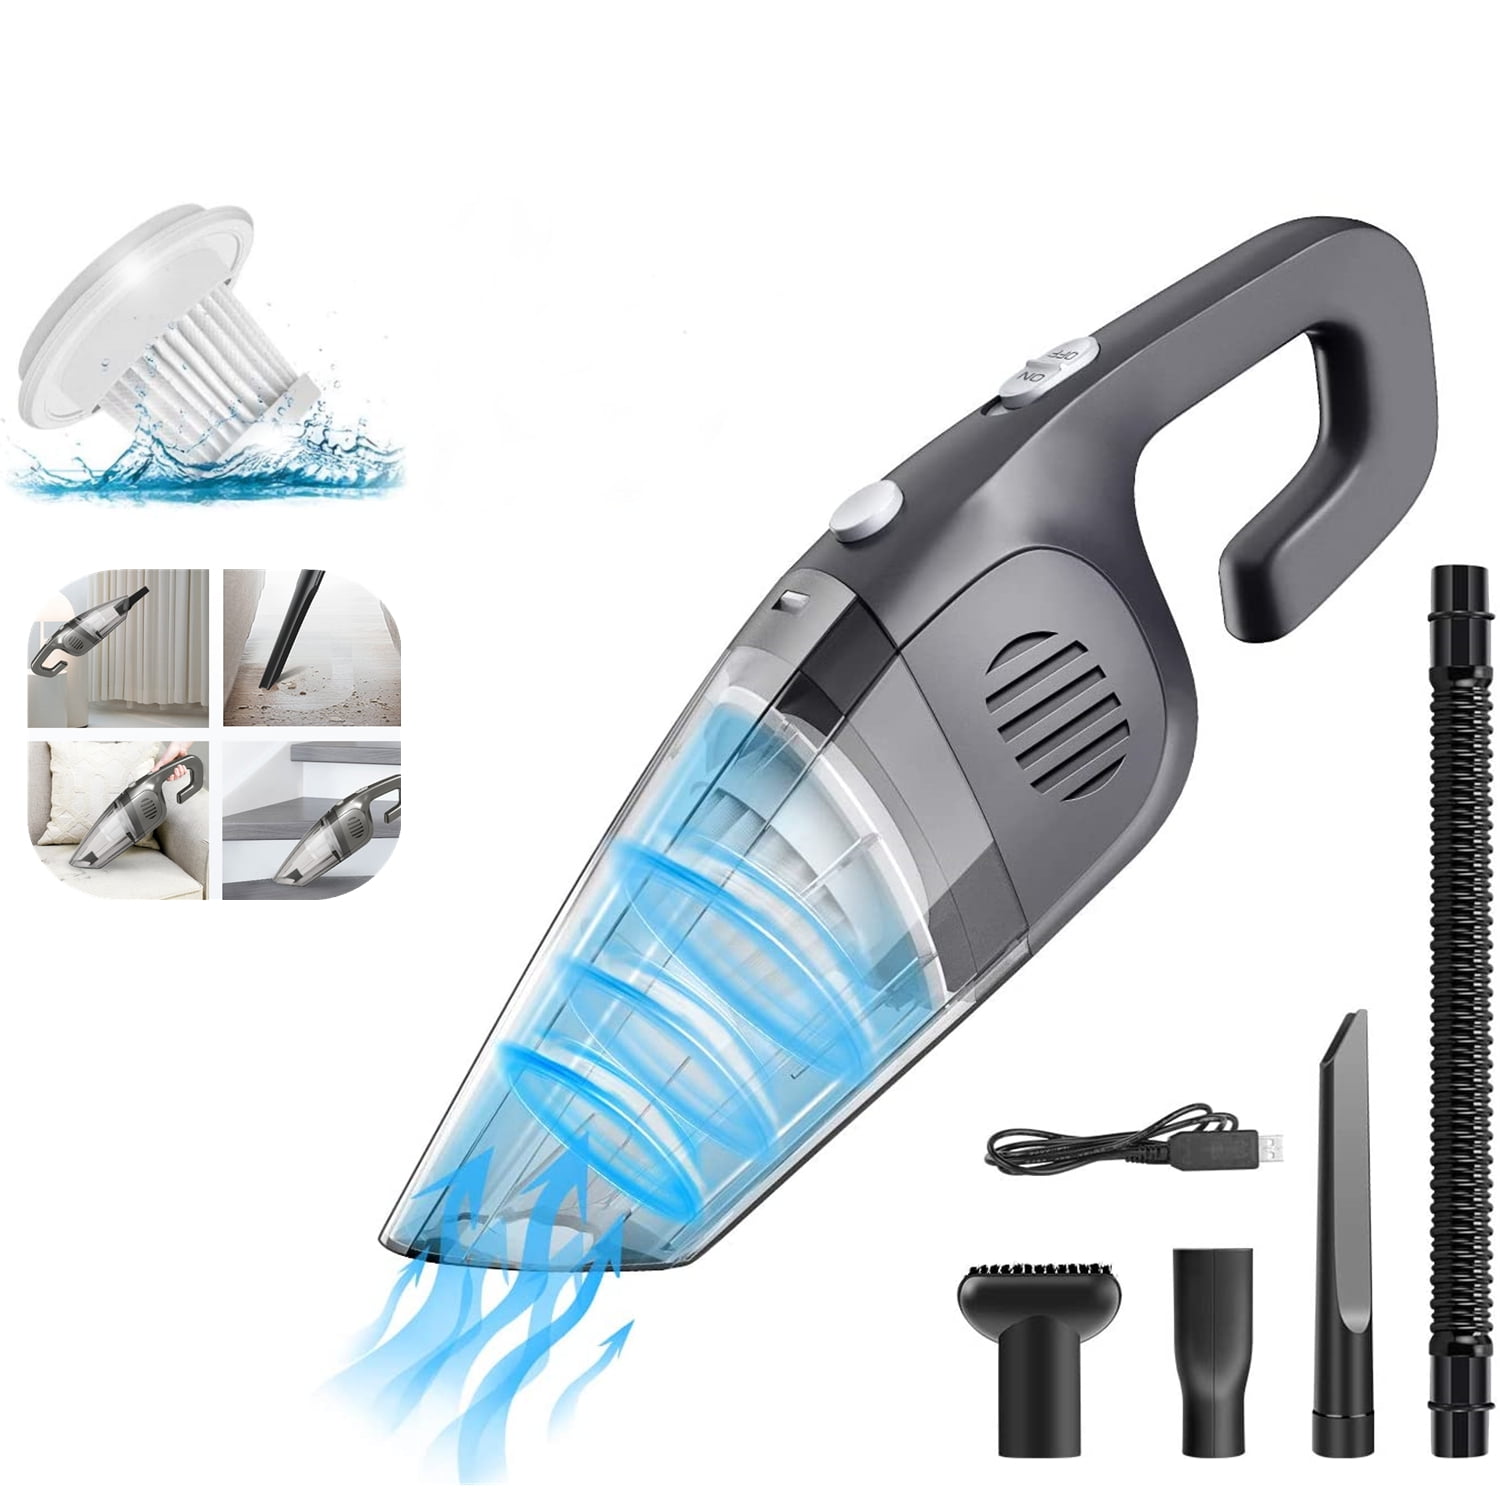 Wet Dry with LED Indicator Rechargeable Car Pet Home Kitchen Vac Cleaner 5KPA Lightweight Vacuum Super Suction Low Noise Portable Cleaner Holife Handheld Vacuums Up to 24 Mins Cordless